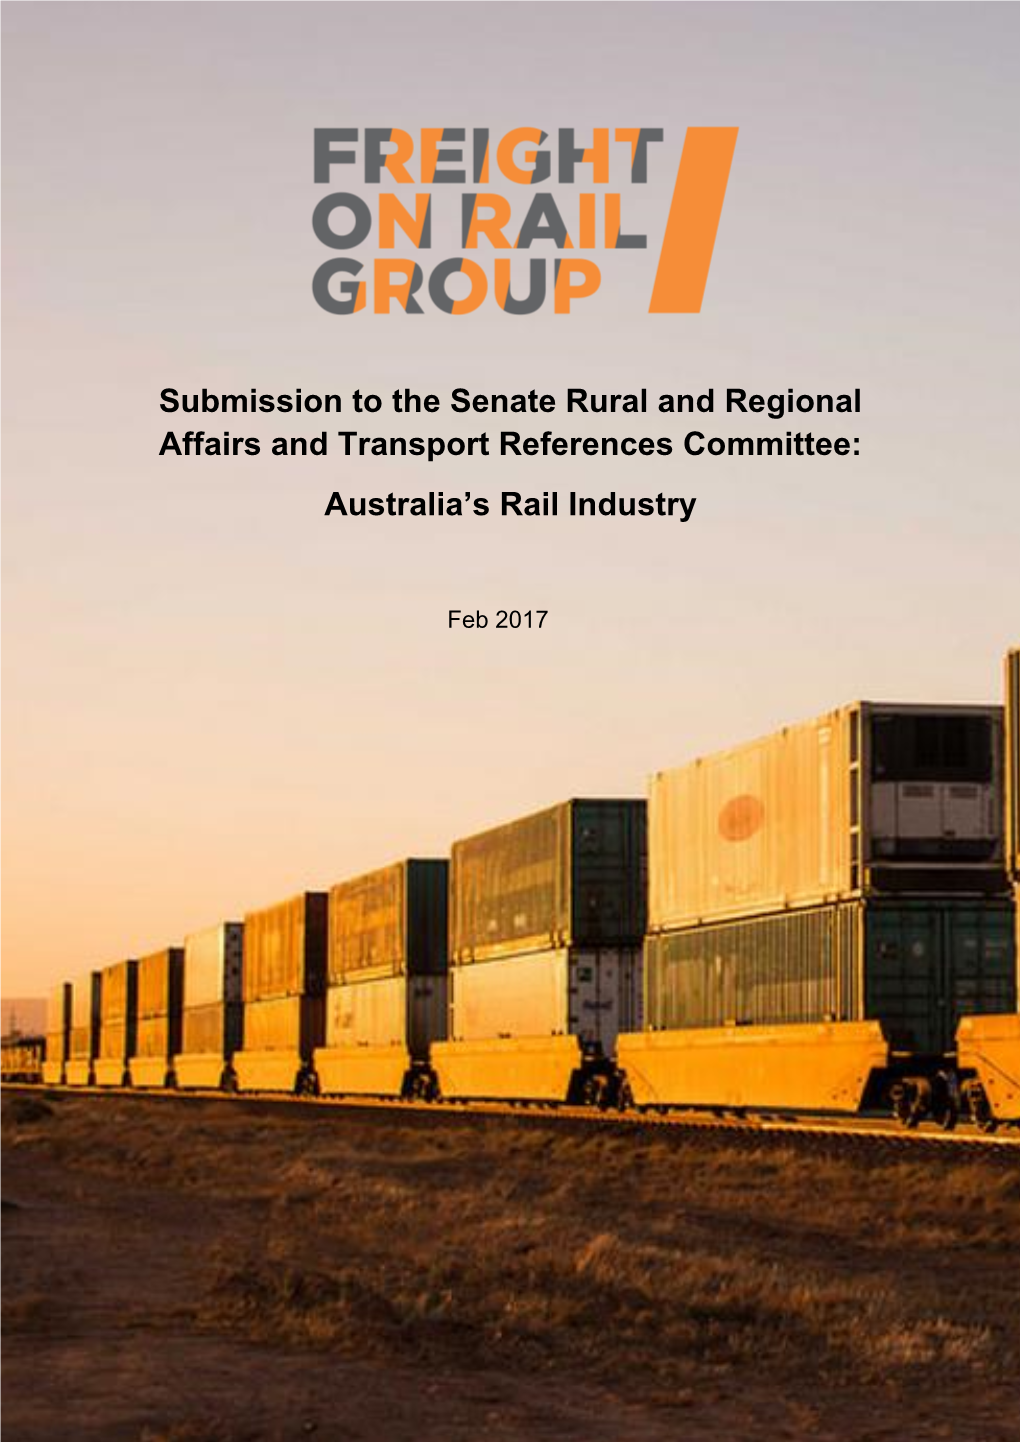 Submission to the Senate Rural and Regional Affairs and Transport References Committee: Australia's Rail Industry